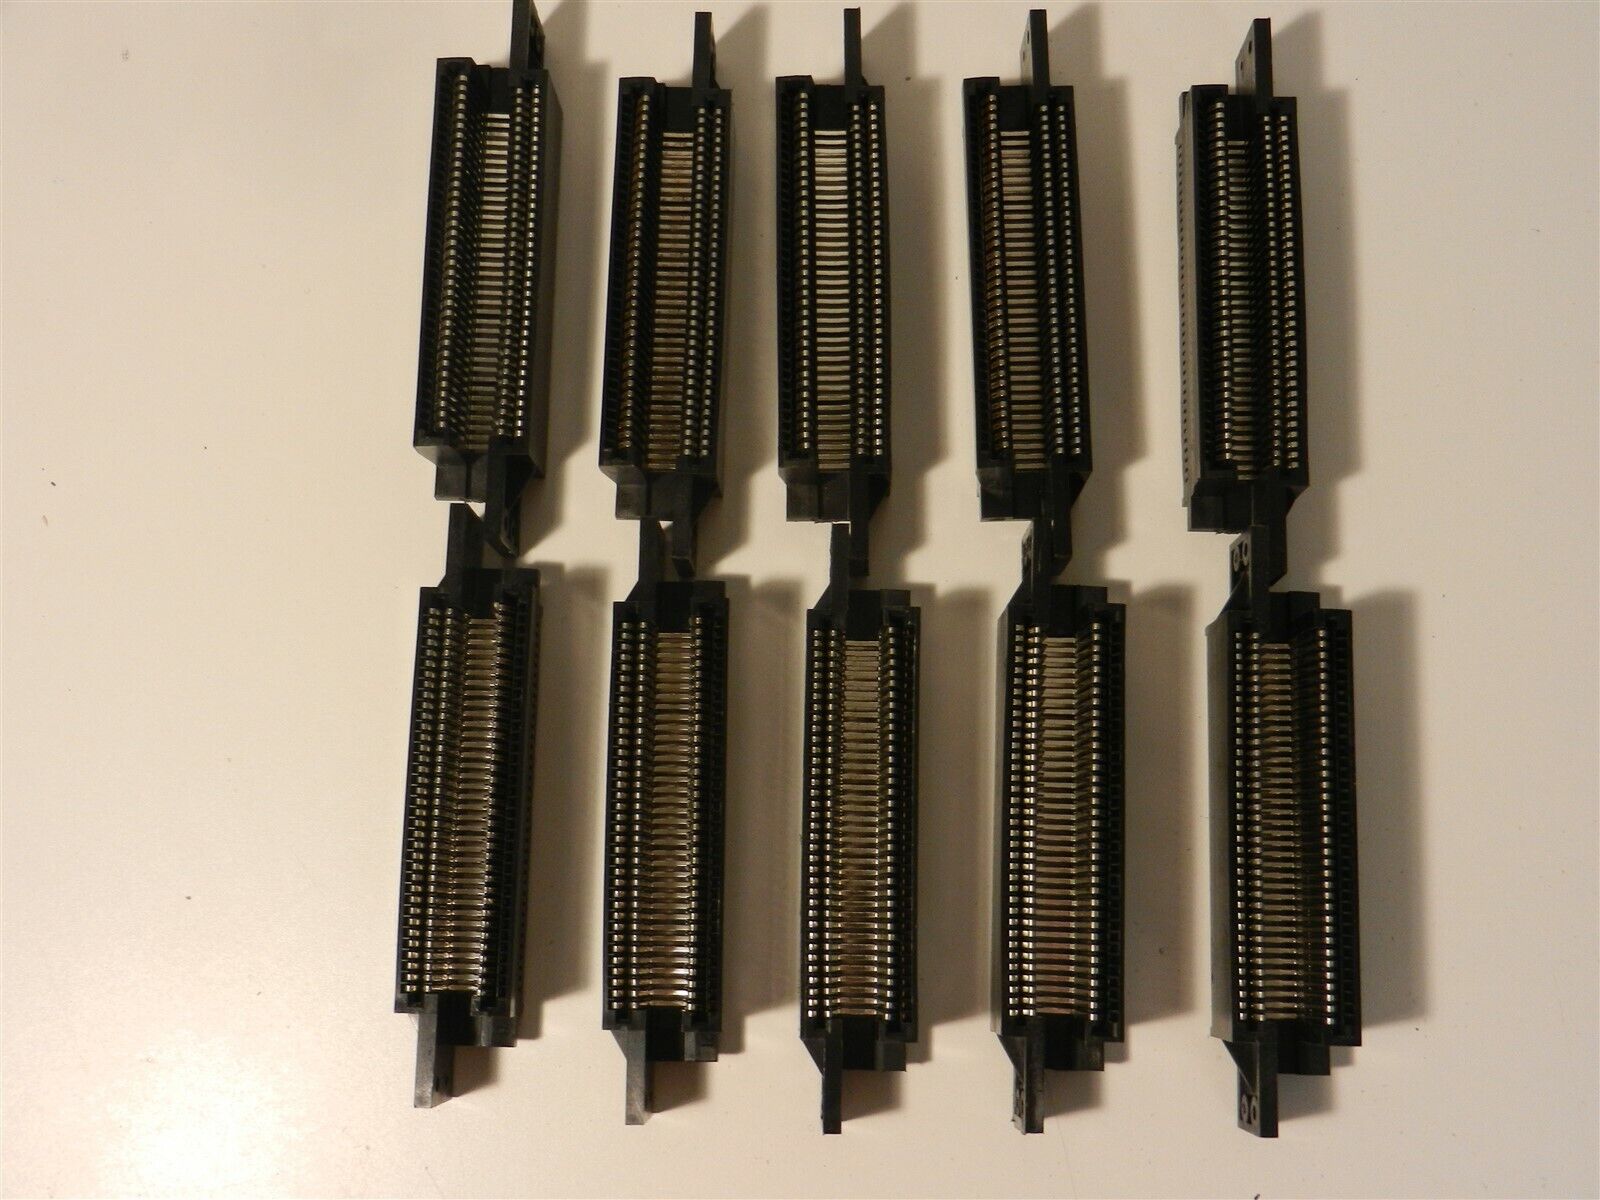 Lot of 10 Original OEM Nintendo NES Replacement 72 Pin Connector Refurbished Nintendo Does Not Apply